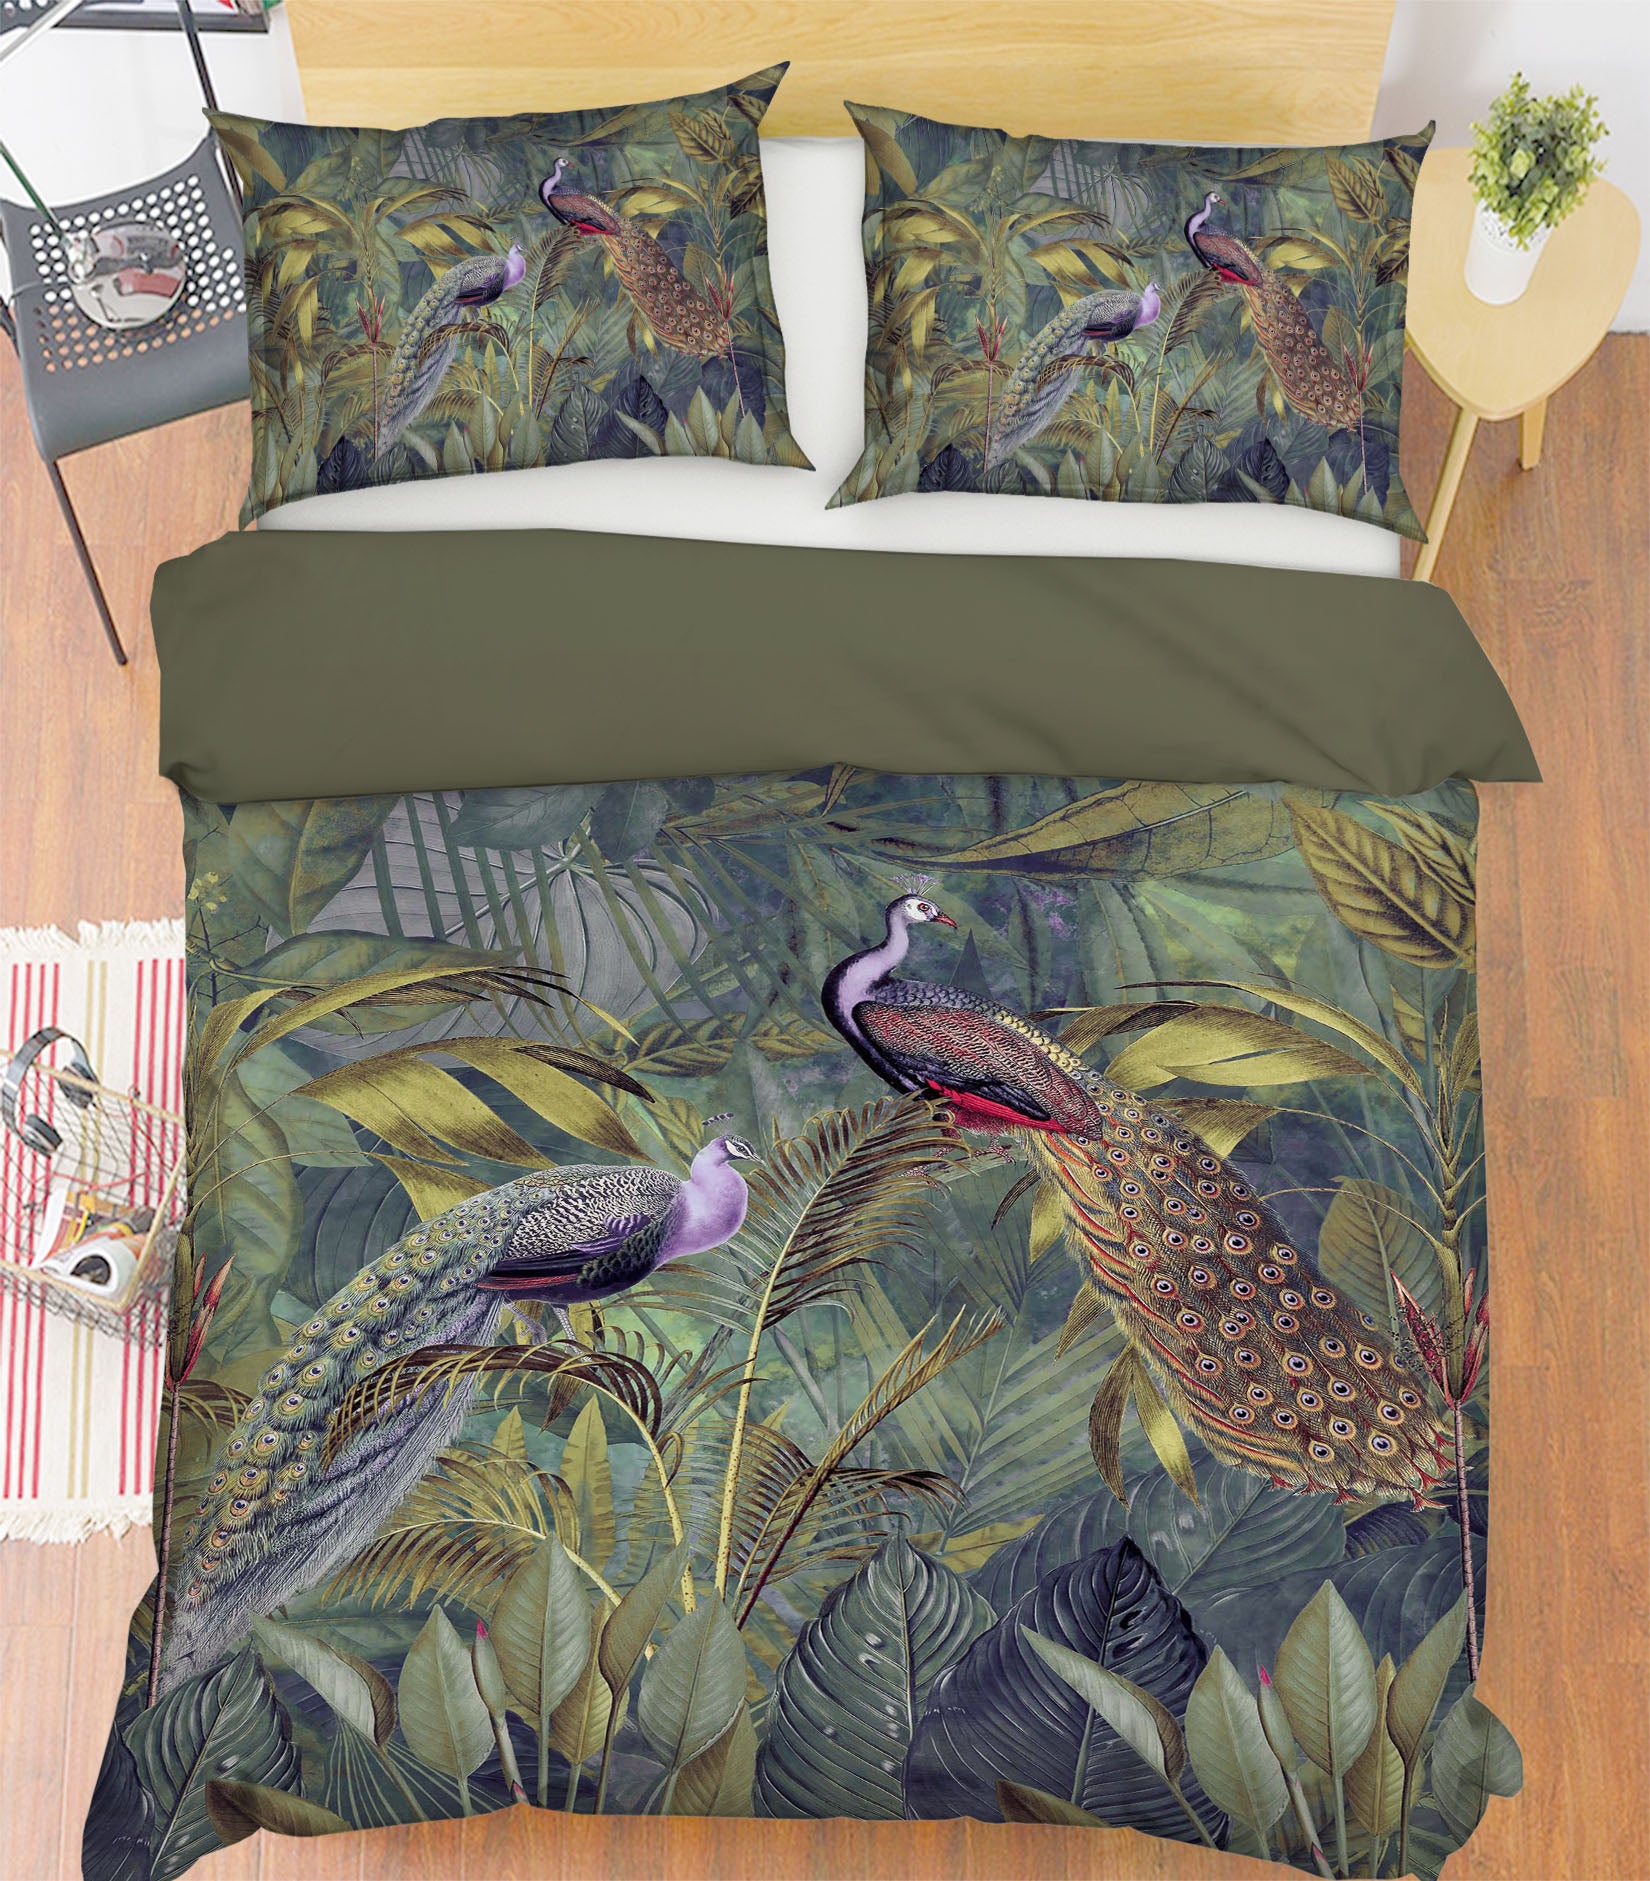 3D Peacock Leaves 117 Andrea haase Bedding Bed Pillowcases Quilt